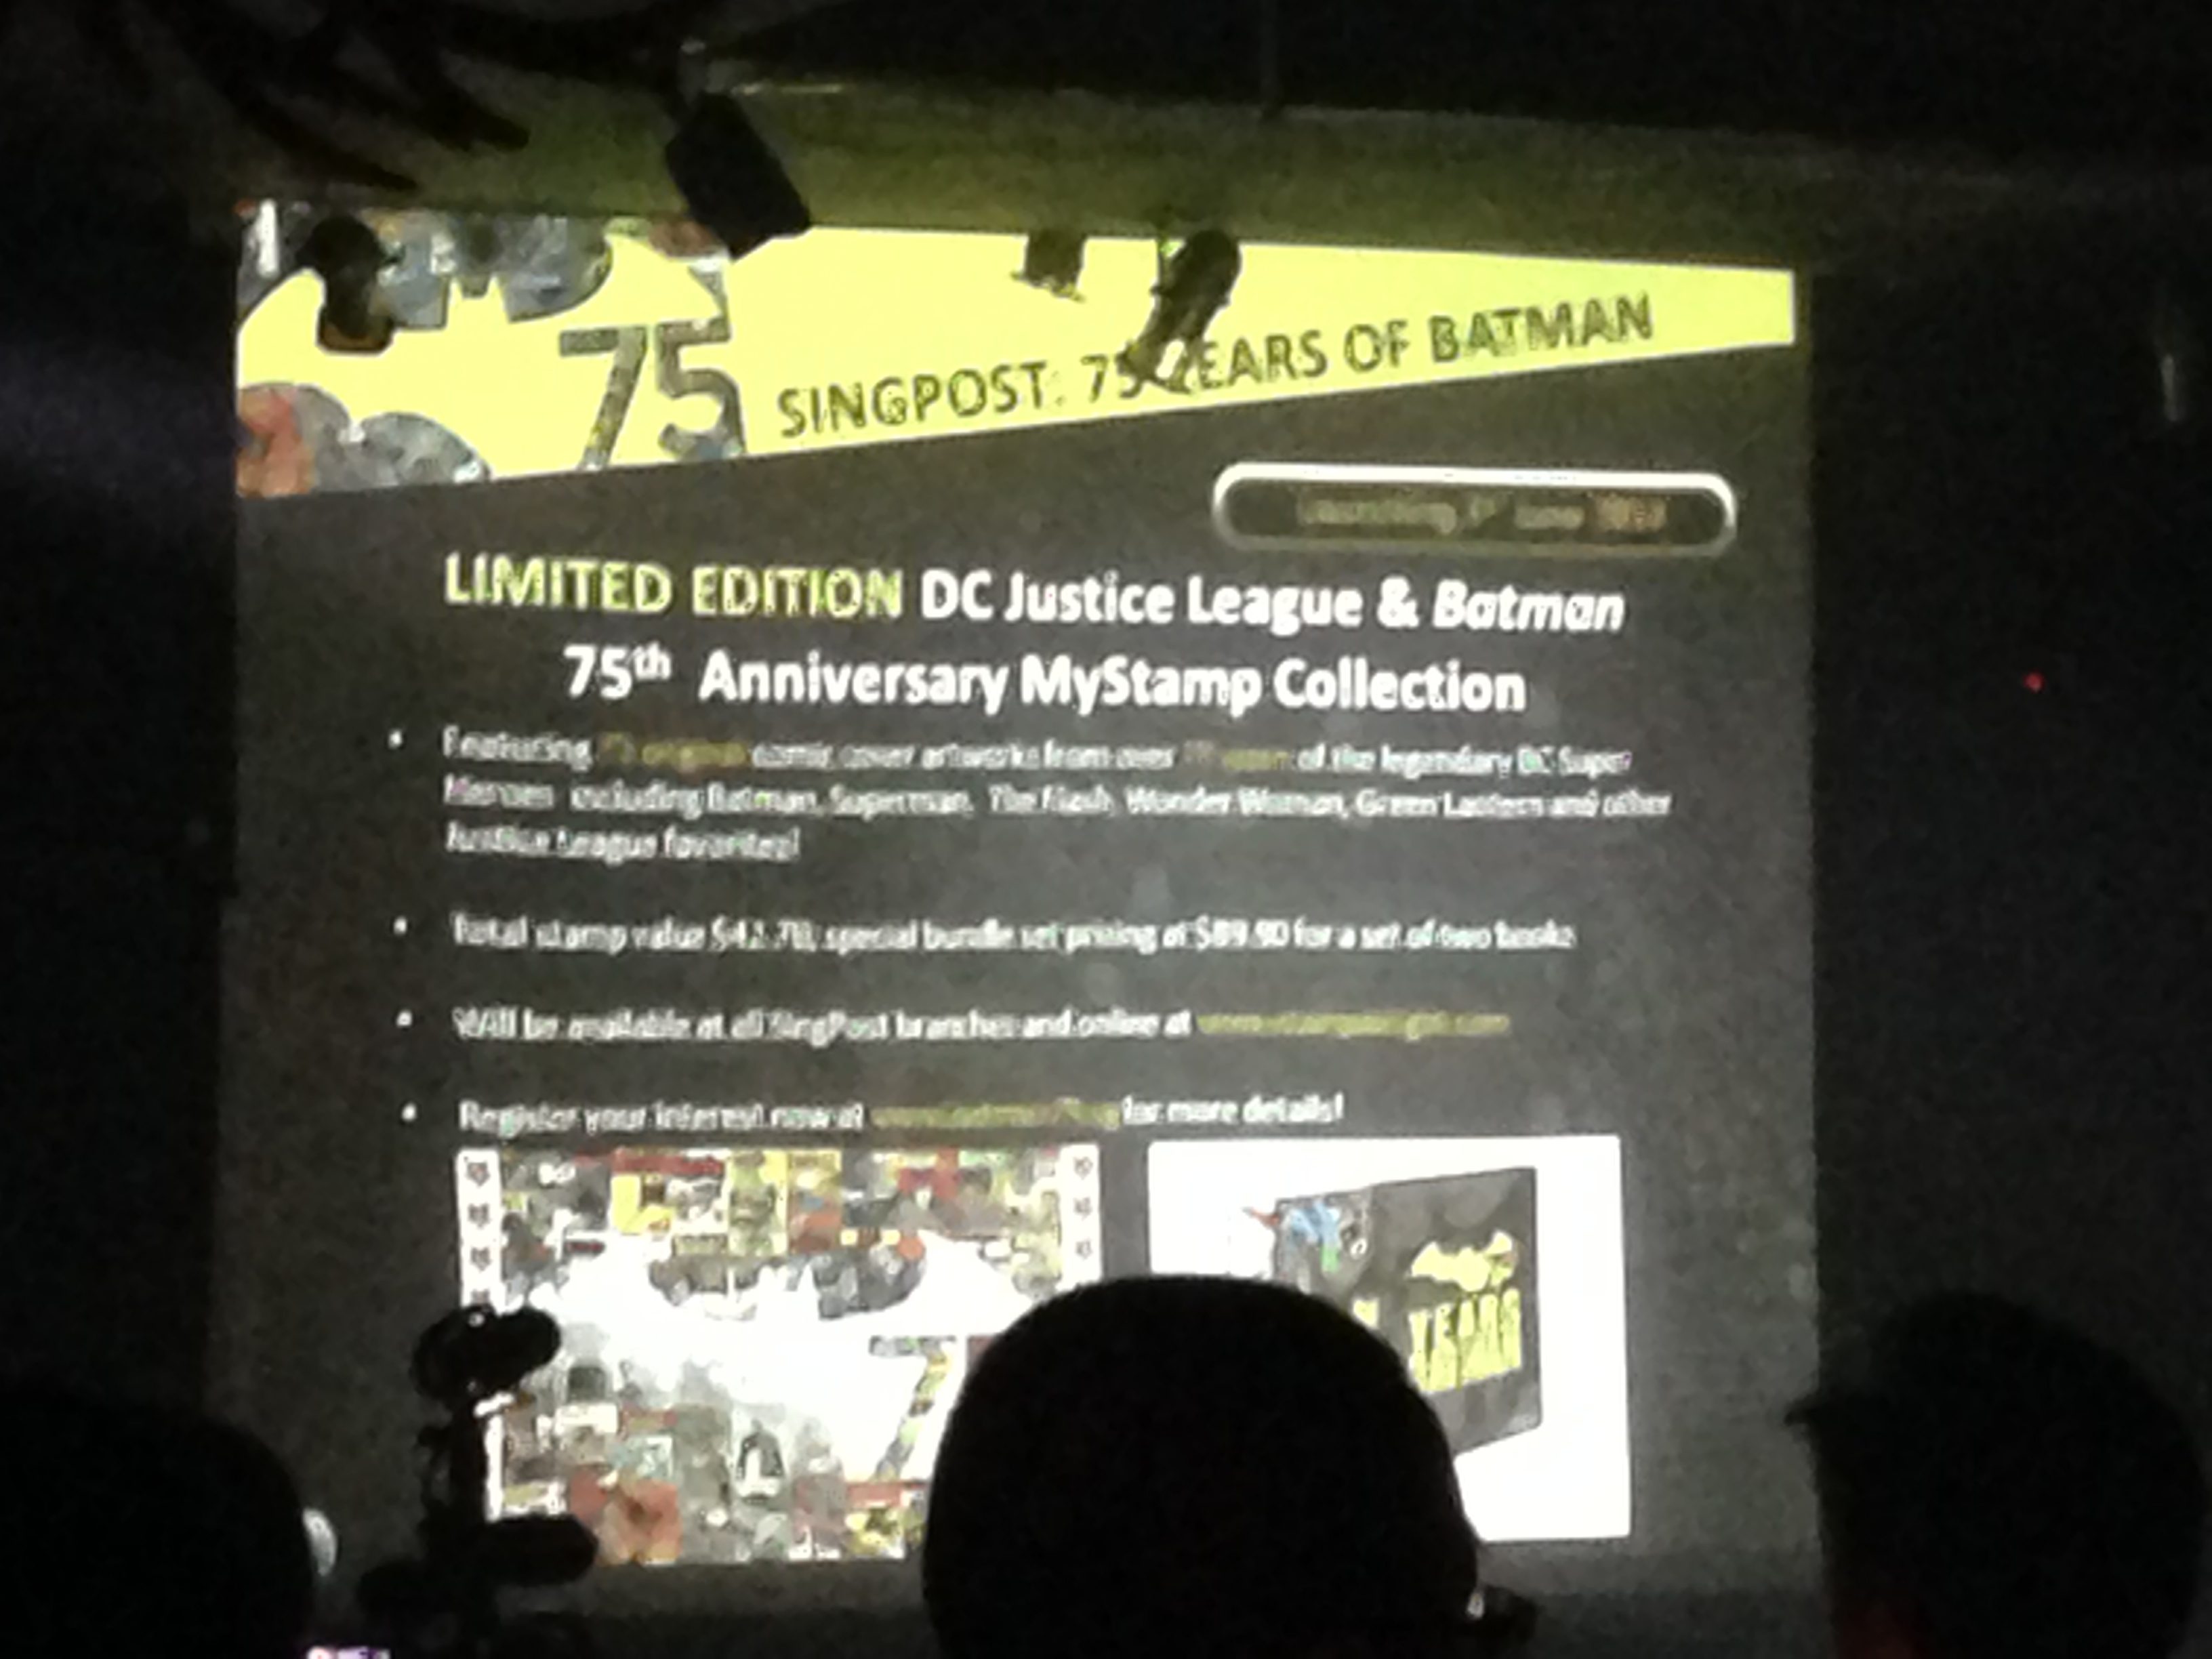 Limited edition Justice League stuff! Not New 52 though.